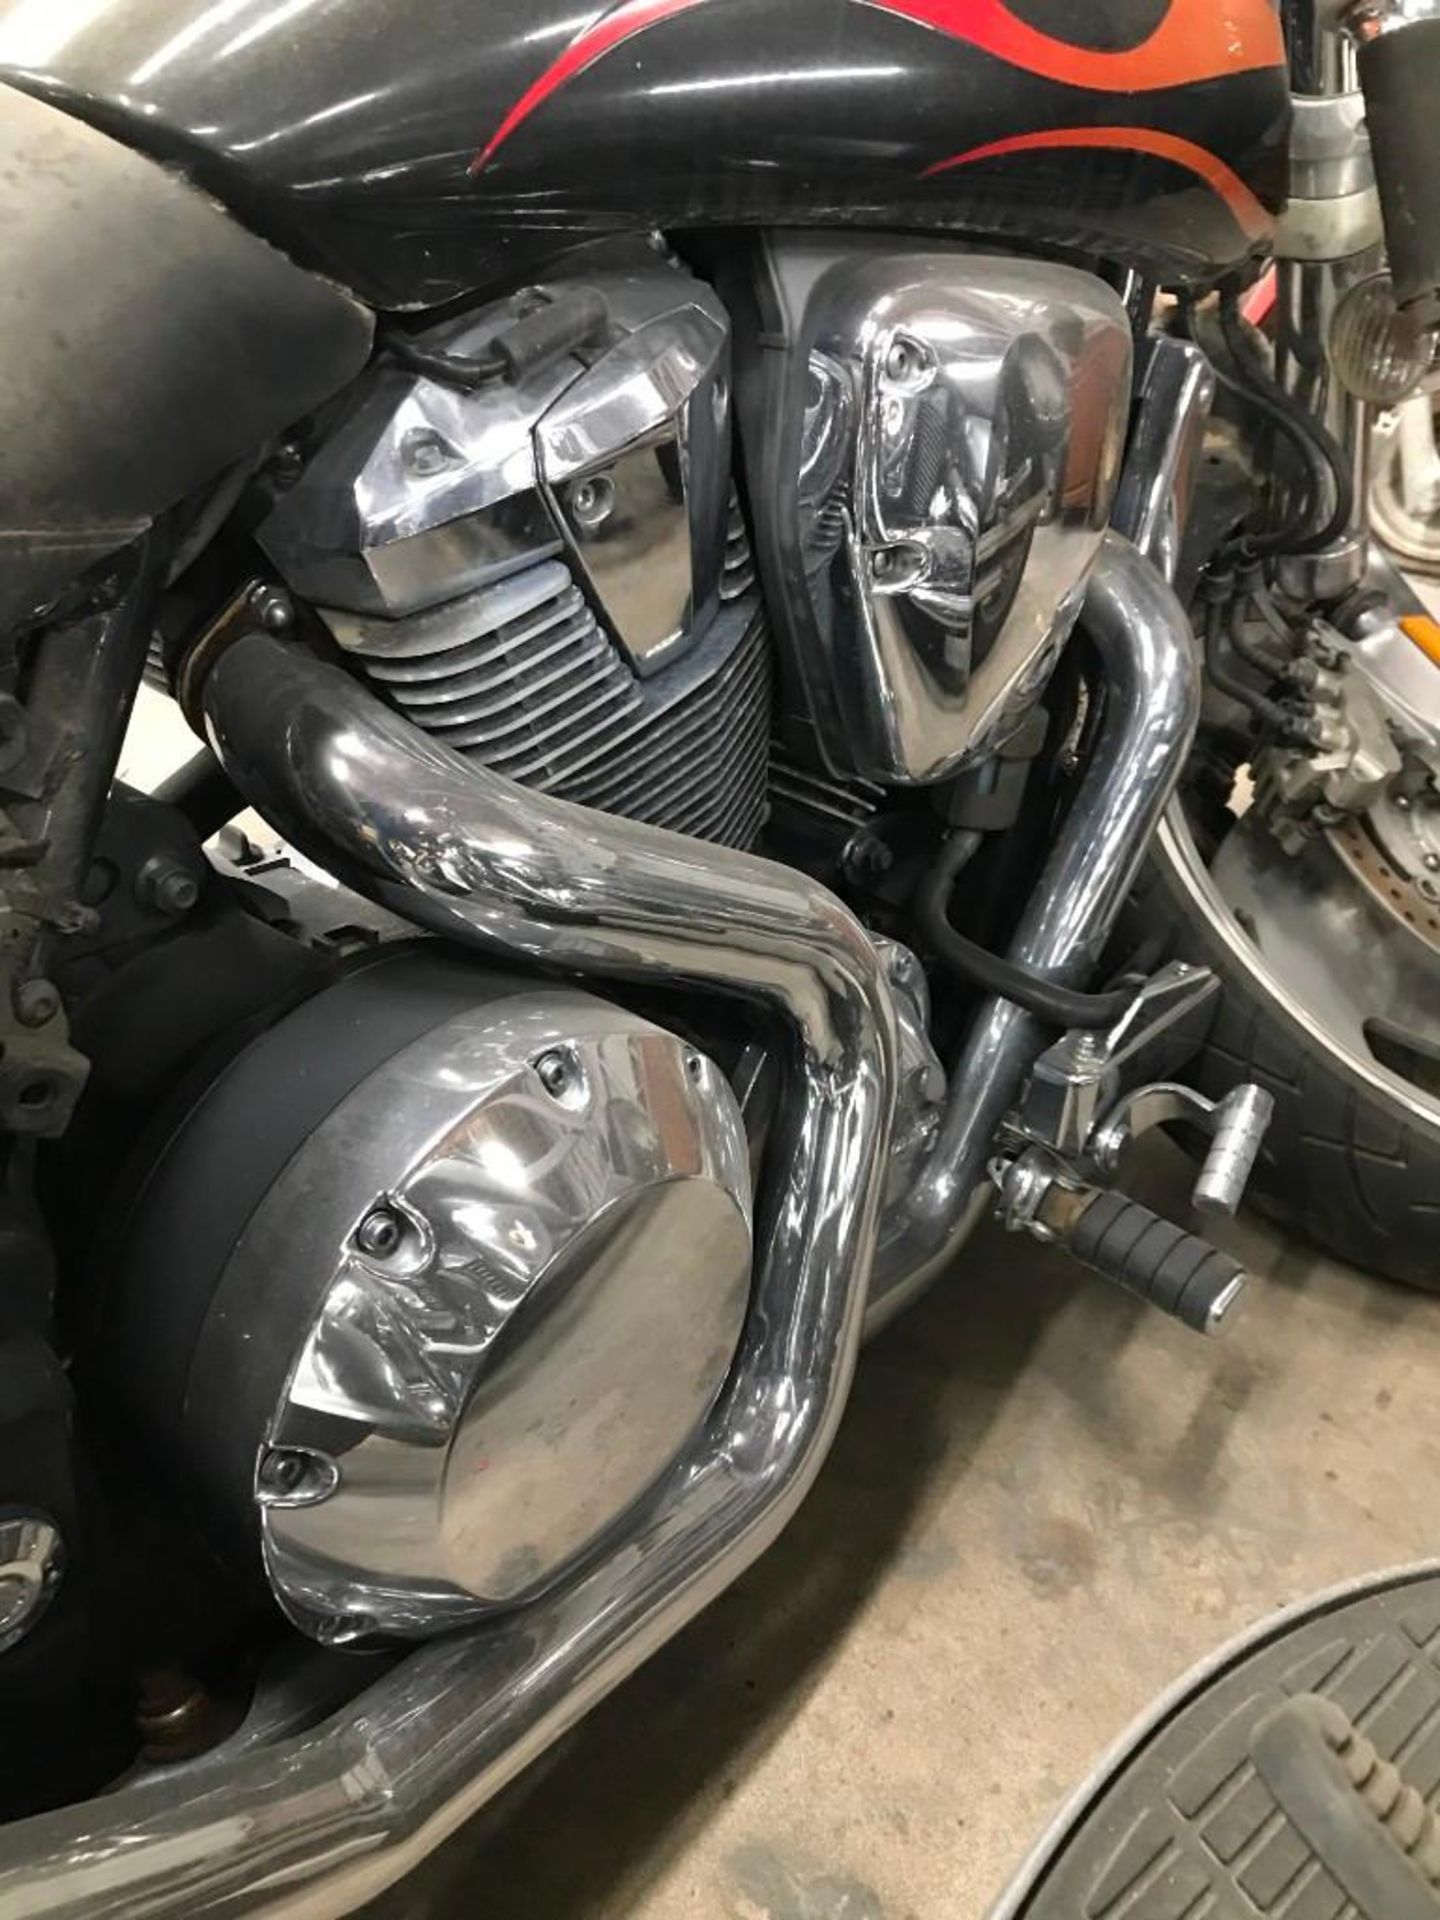 2006 HONDA VTX1800C2 MOTORCYCLE (PARTS ONLY) - Image 18 of 18